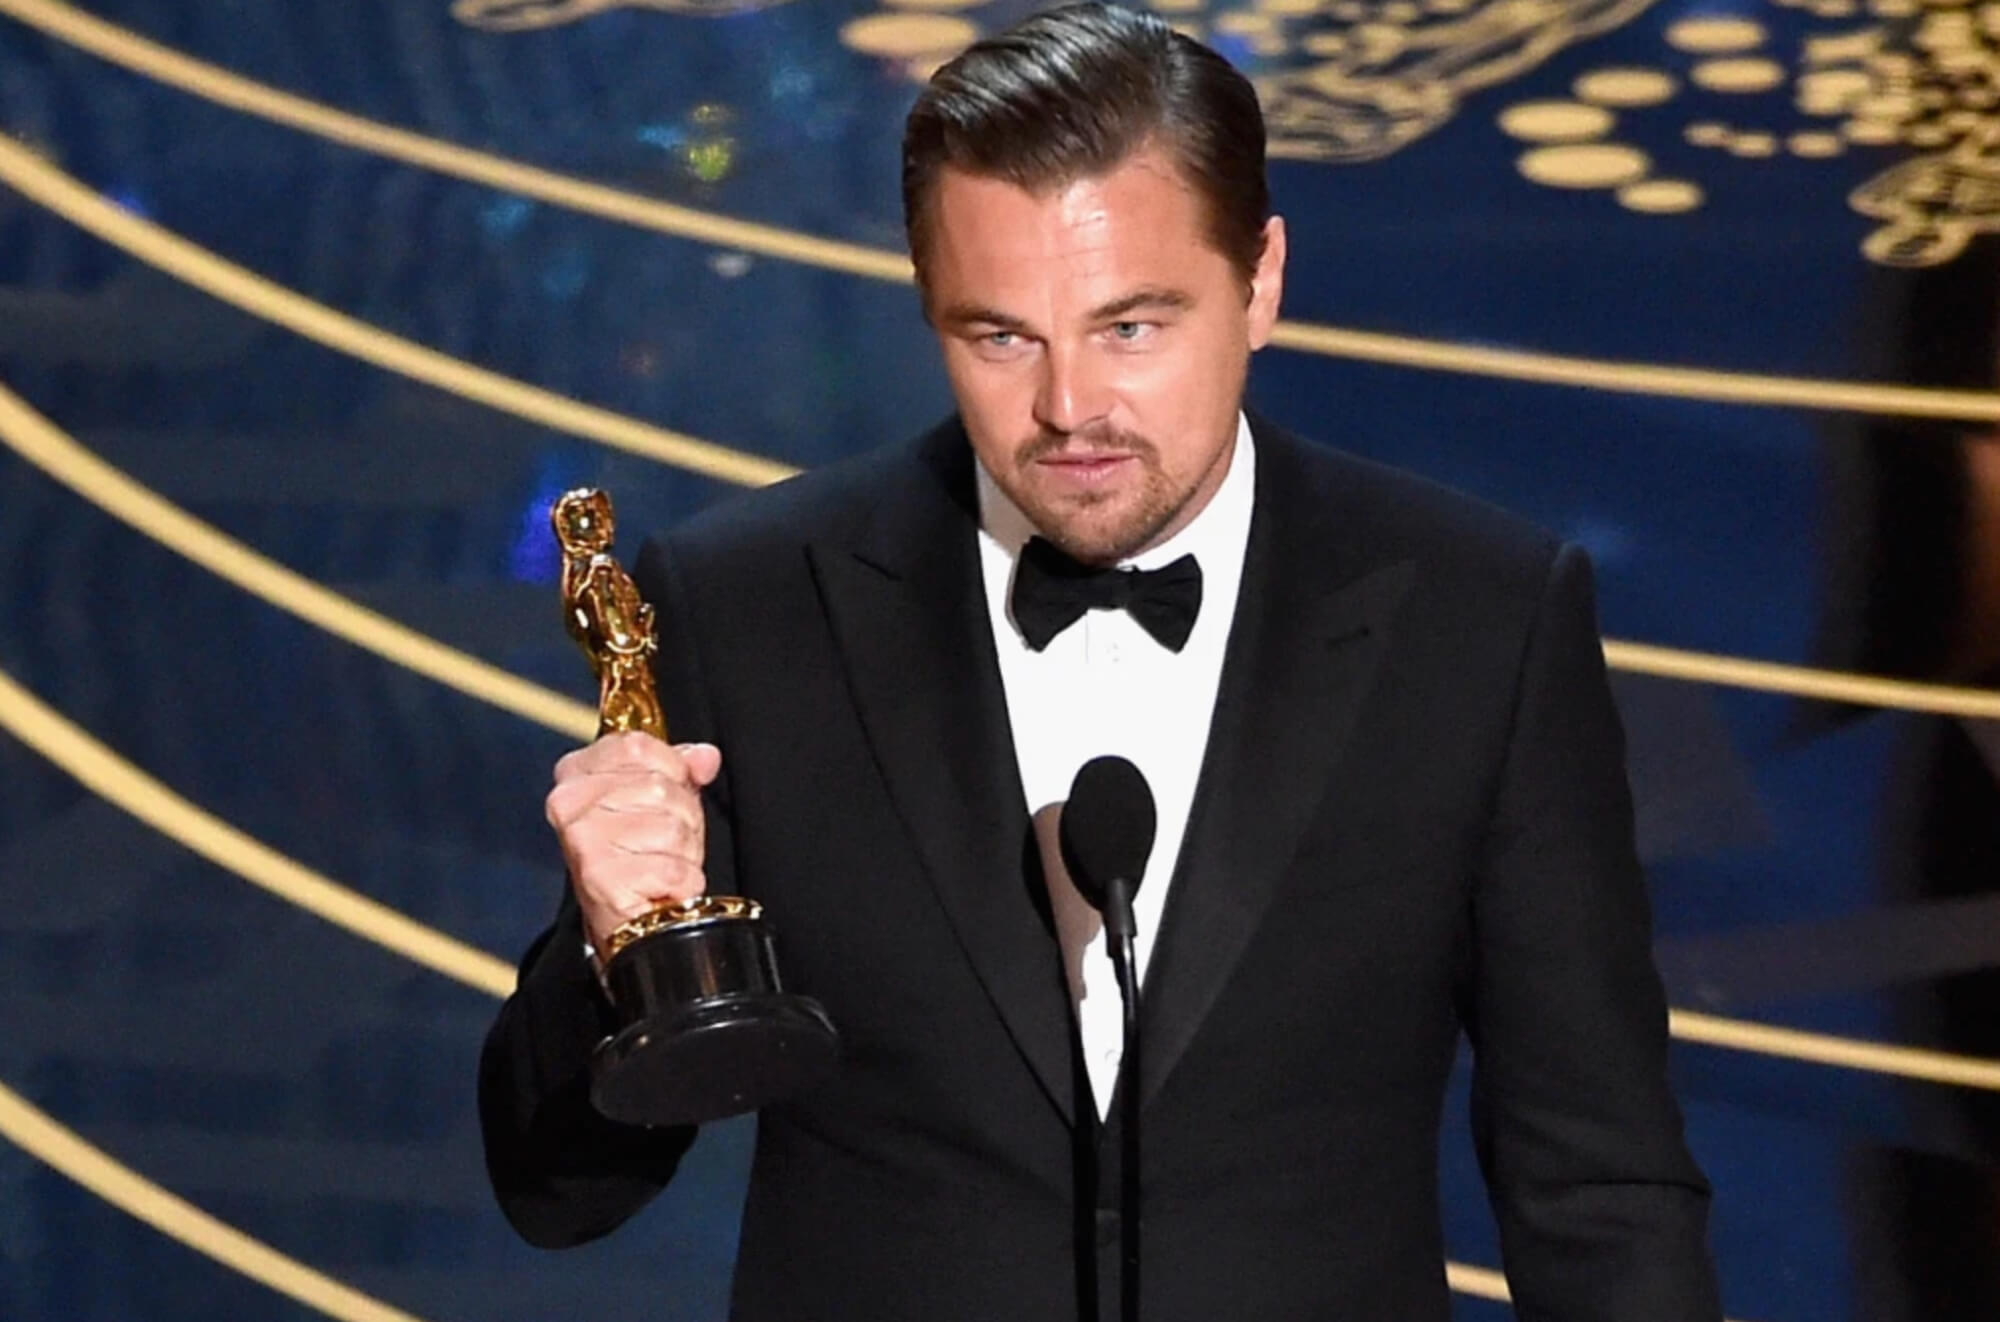 Thankfully, new Oscars producer controlled “thank you” speeches